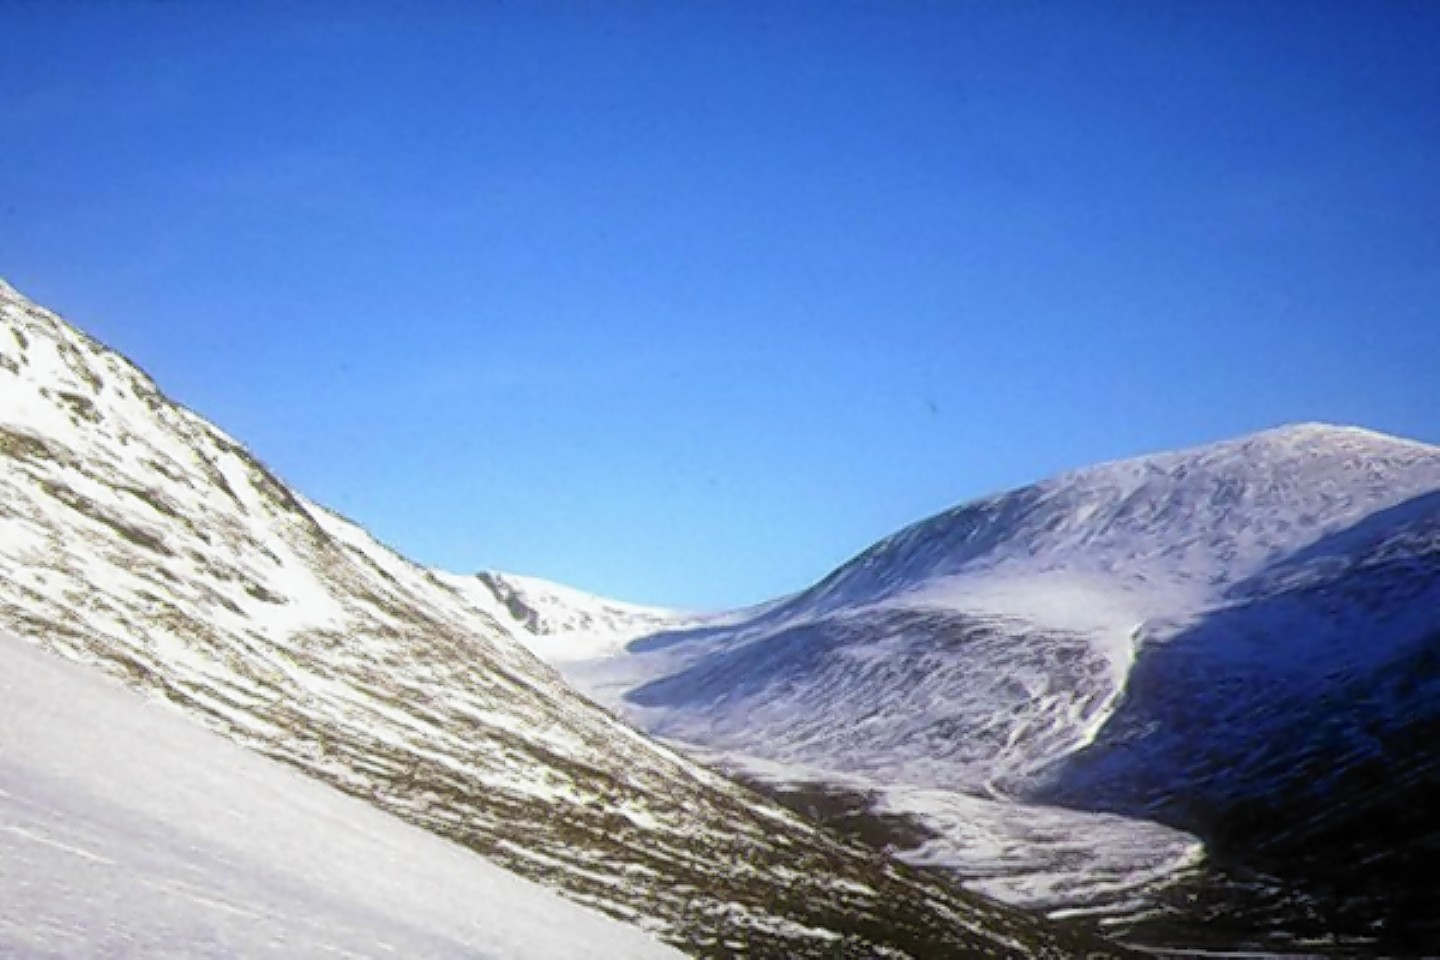 The woman has been attempting to climb Ben Macdui when the wintry conditions disorientated her